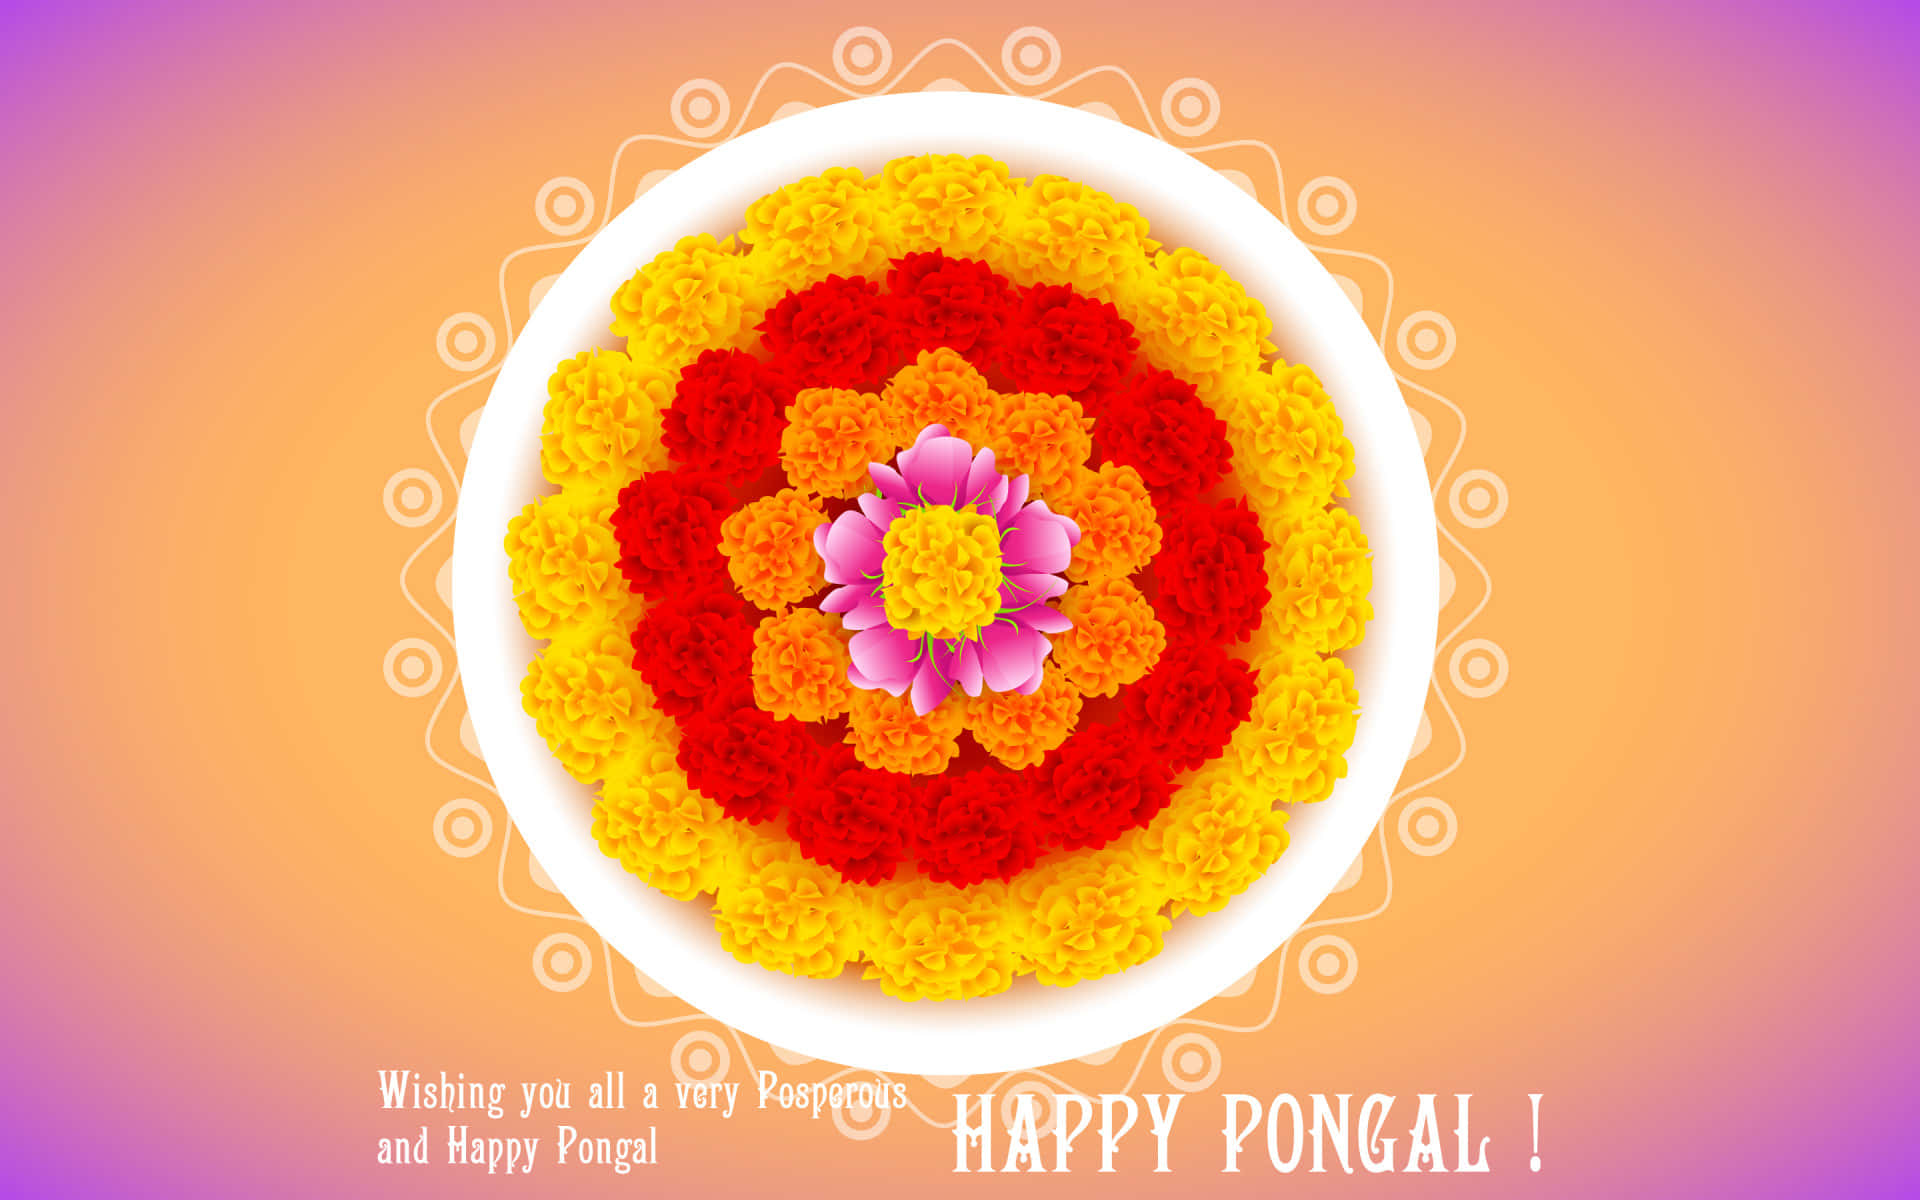 Celebrate Pongal with joy and love